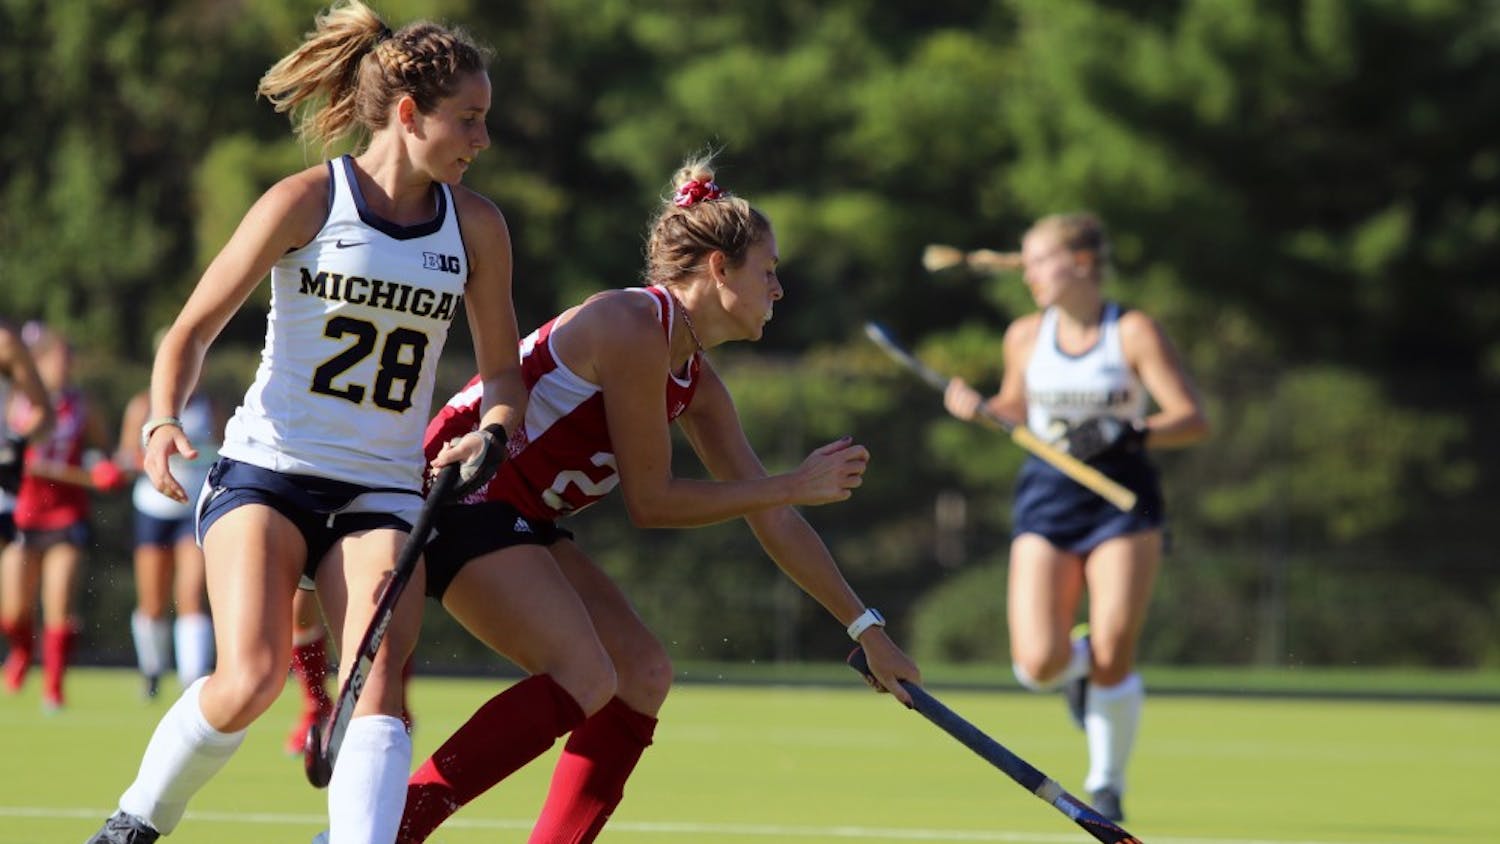 Senior forward Maddie Latino controls the ball against Michigan on Oct. 13 at the IU Field Hockey Complex. IU finished Big Ten play 0-8 after losses to Ohio State and Penn State this past weekend.&nbsp;